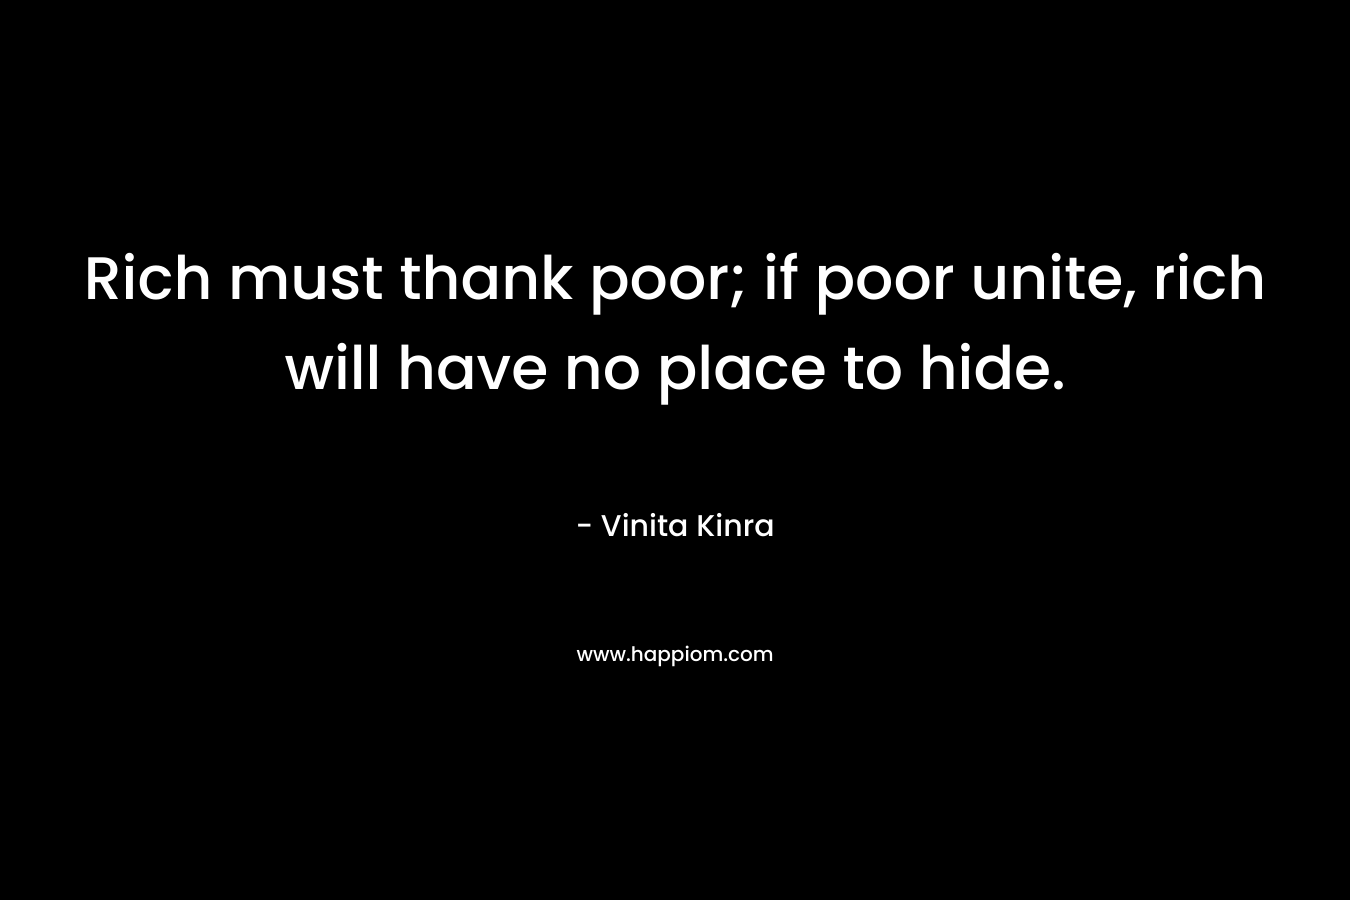 Rich must thank poor; if poor unite, rich will have no place to hide. – Vinita Kinra